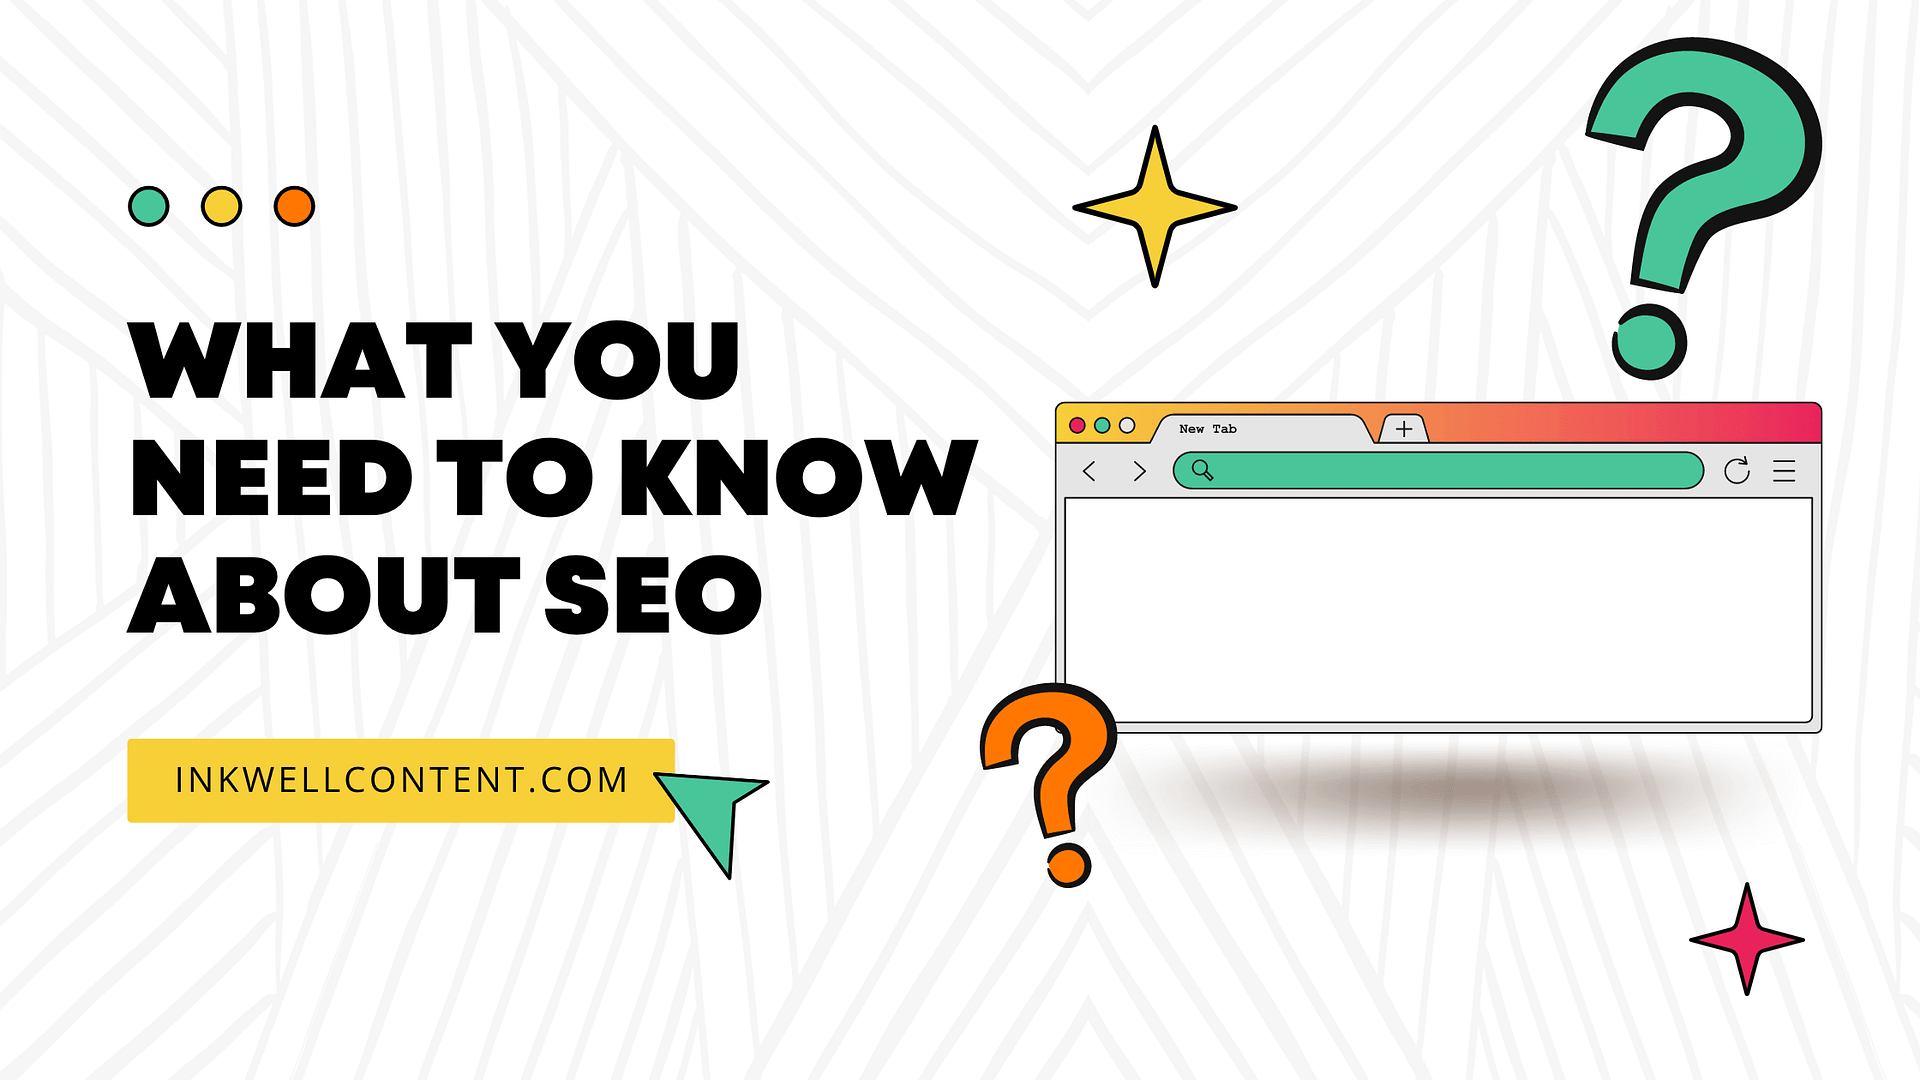 A banner image for this blog reads "What you need to know about SEO" with question marks and a browser pictured